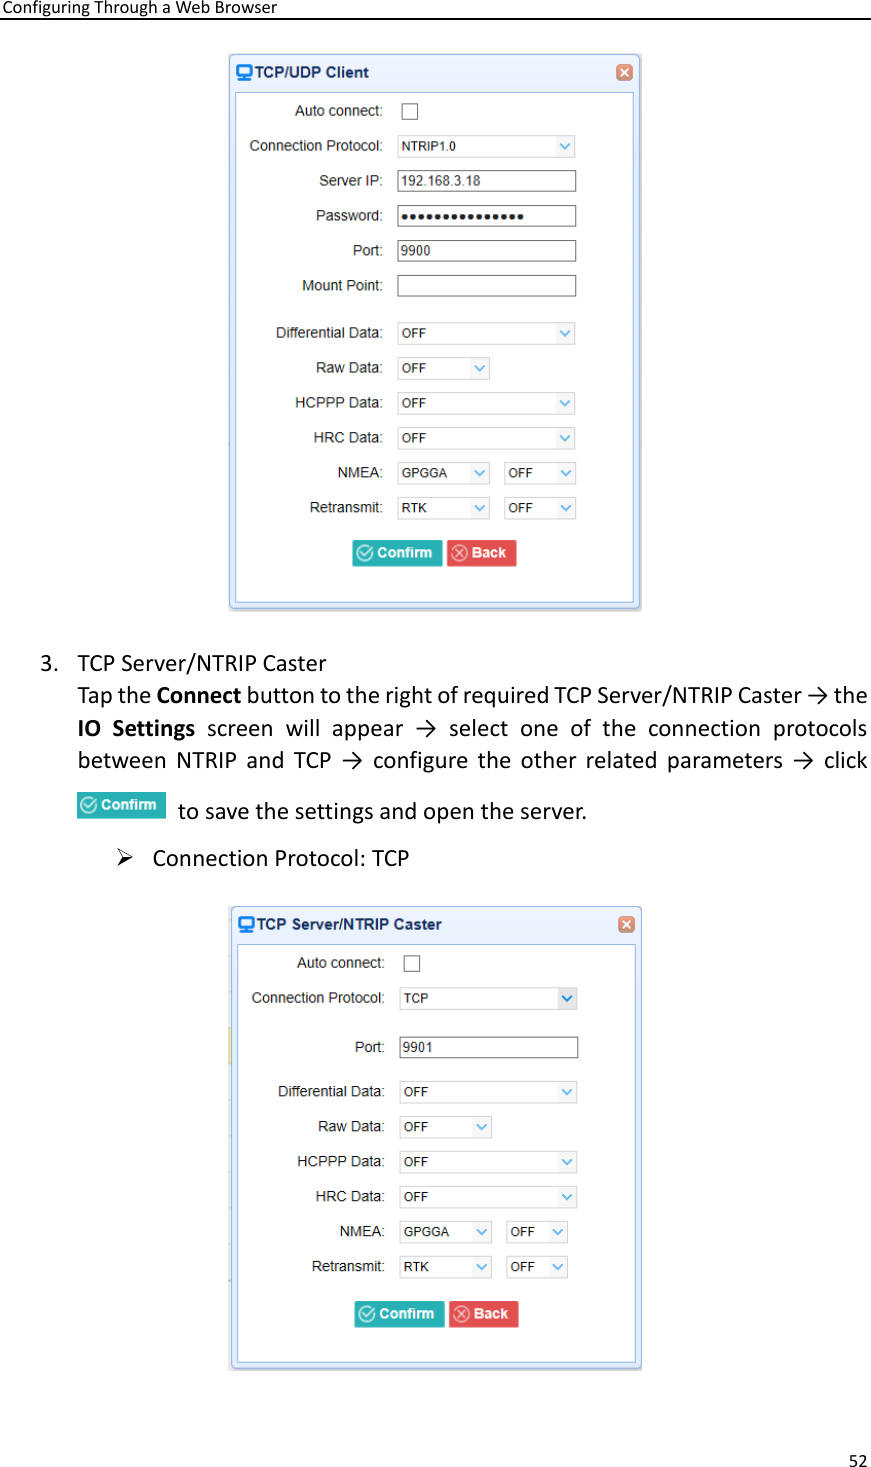 Configuring Through a Web Browser 52   3. TCP Server/NTRIP Caster Tap the Connect button to the right of required TCP Server/NTRIP Caster → the IO  Settings  screen  will  appear  →  select  one  of  the  connection  protocols between  NTRIP  and  TCP  →  configure  the  other  related parameters  →  click   to save the settings and open the server. ➢ Connection Protocol: TCP  